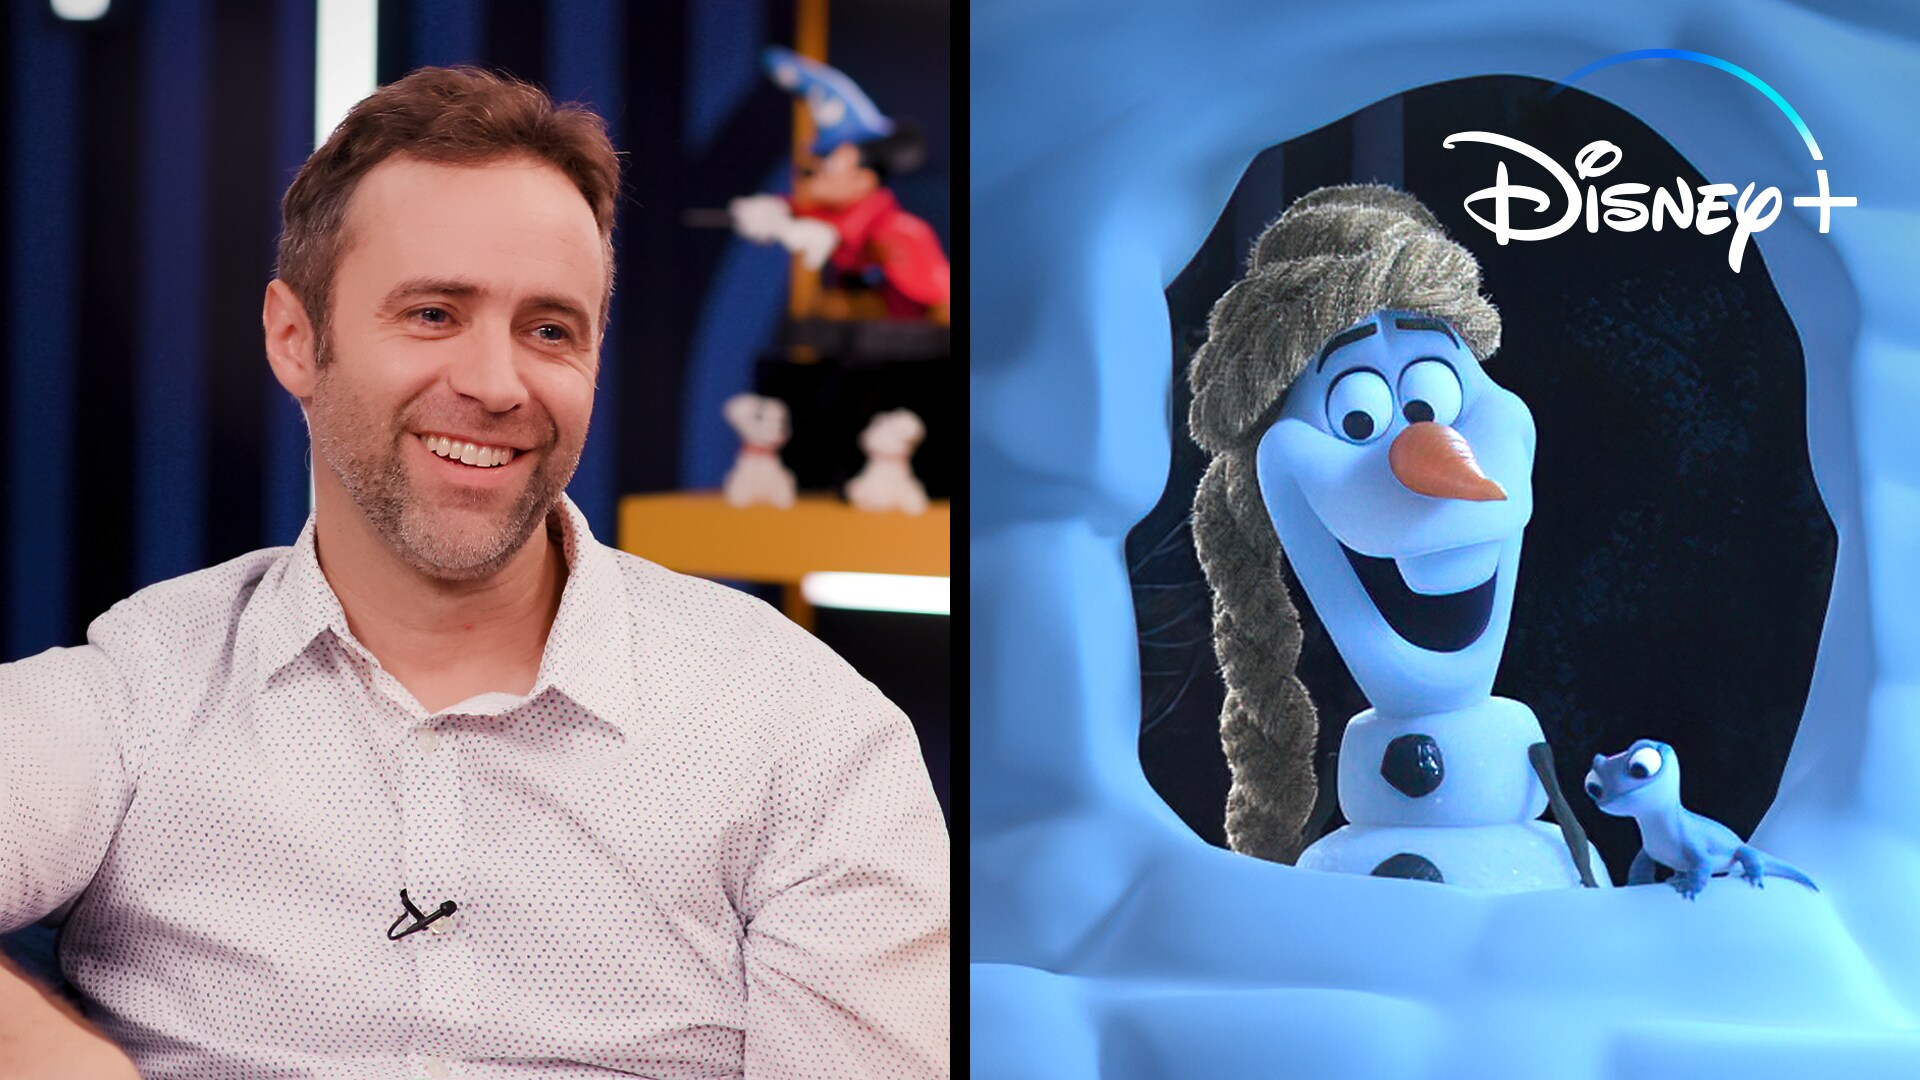 Hyrum Osmond, Director of Olaf Presents | What's Up, Disney+